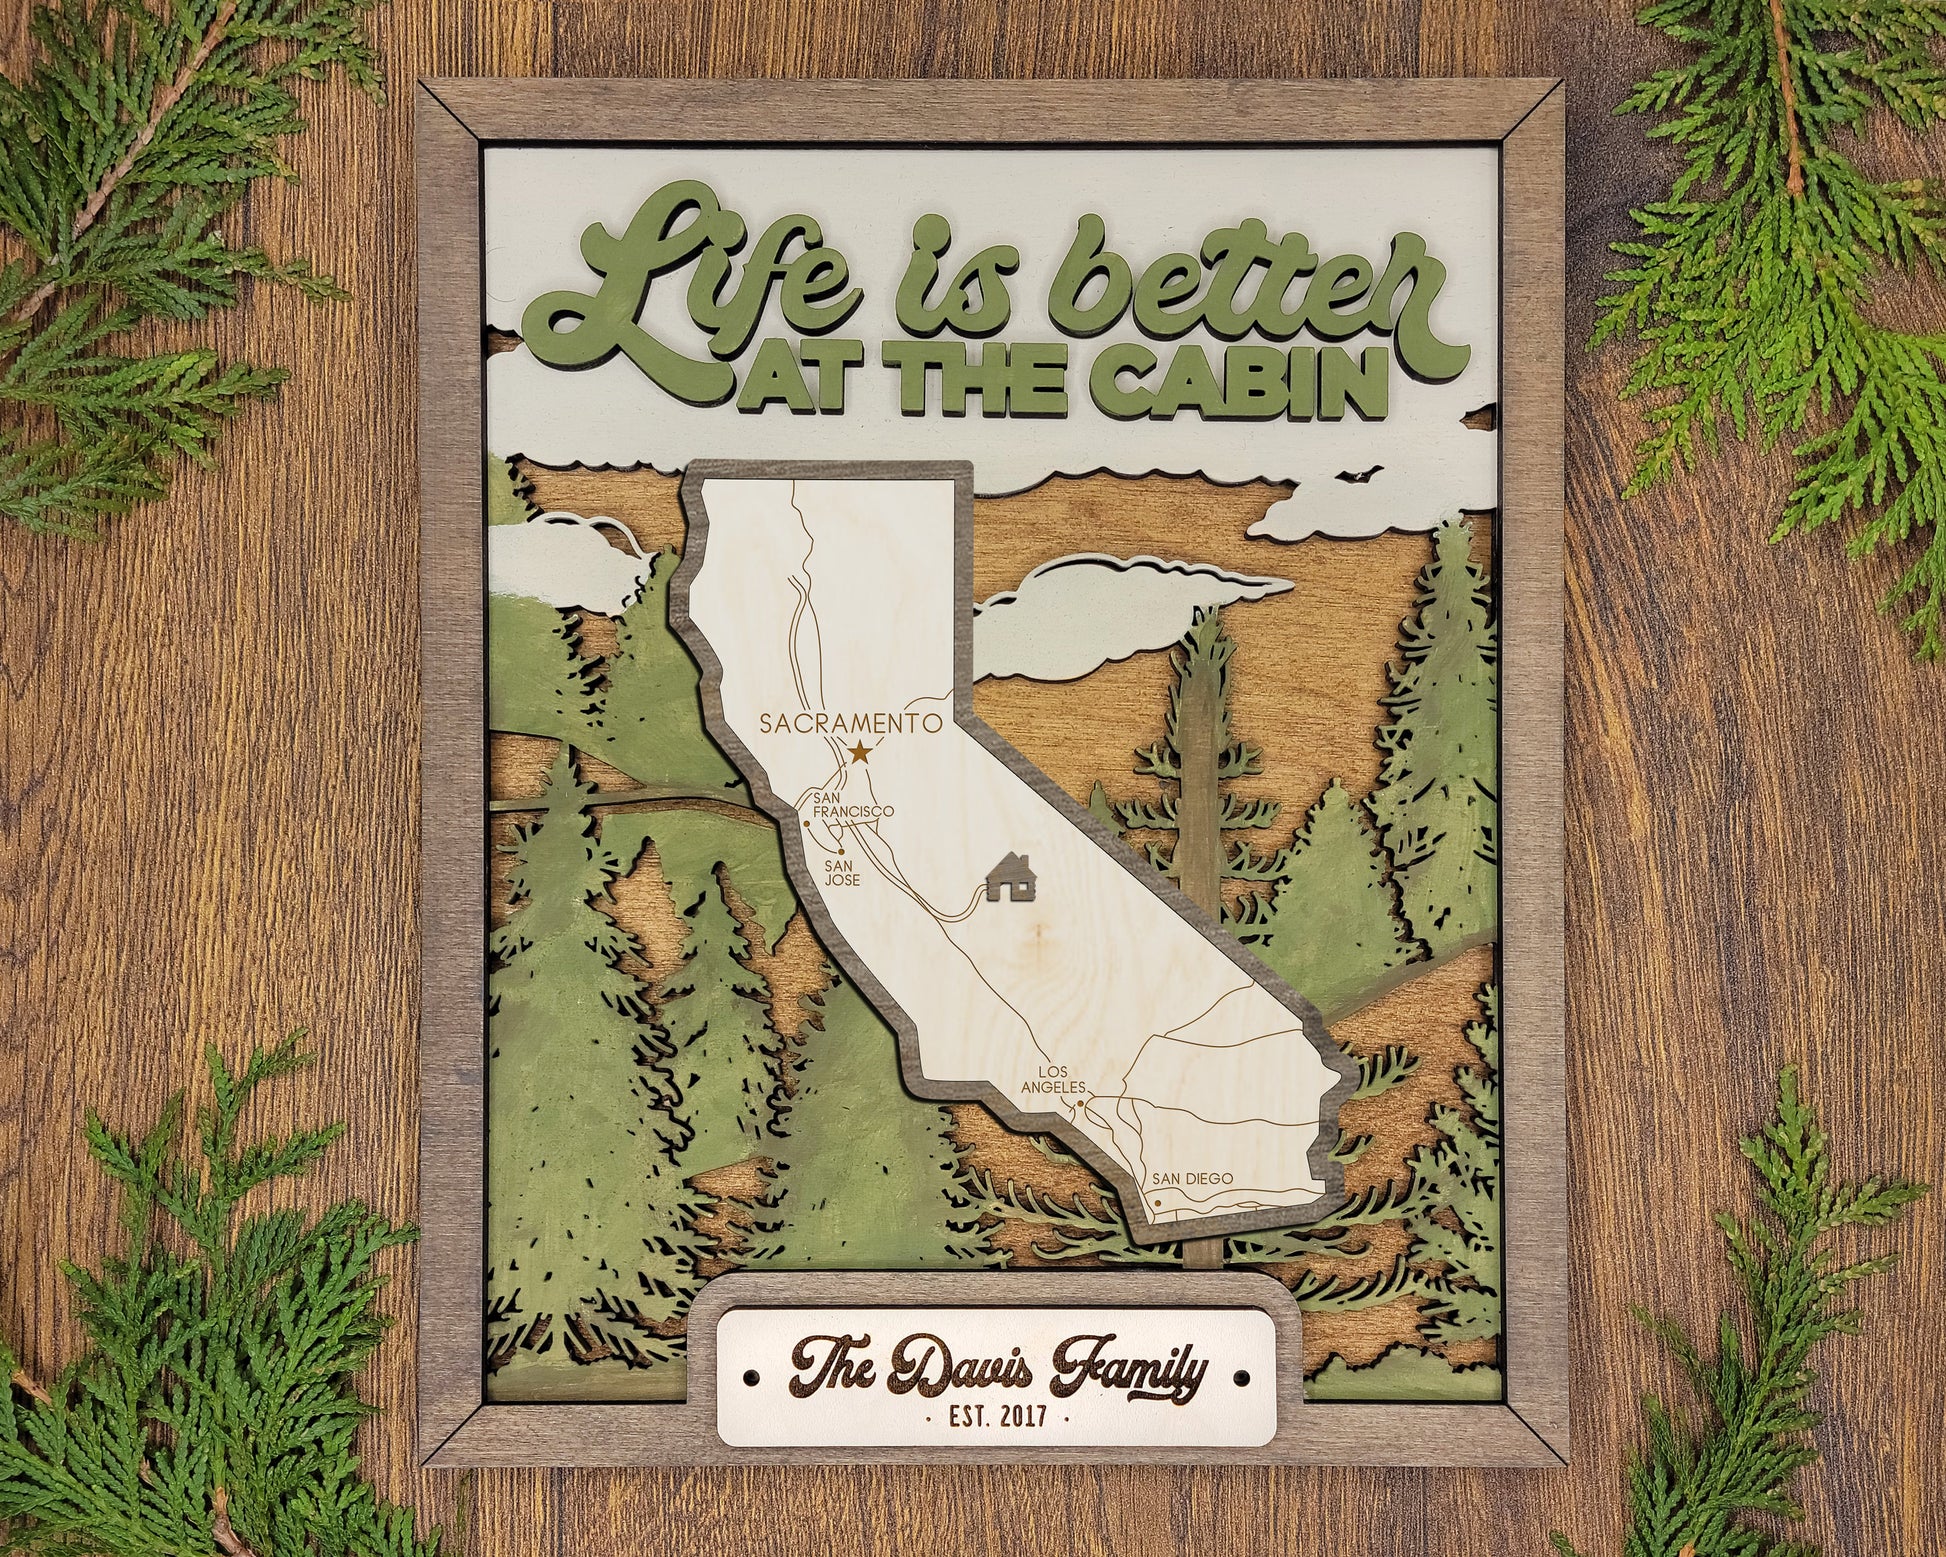 The California State Frame - 13 text options, 12 backgrounds, 25 icons Included - Make over 7,500 designs - Glowforge & Lightburn Tested